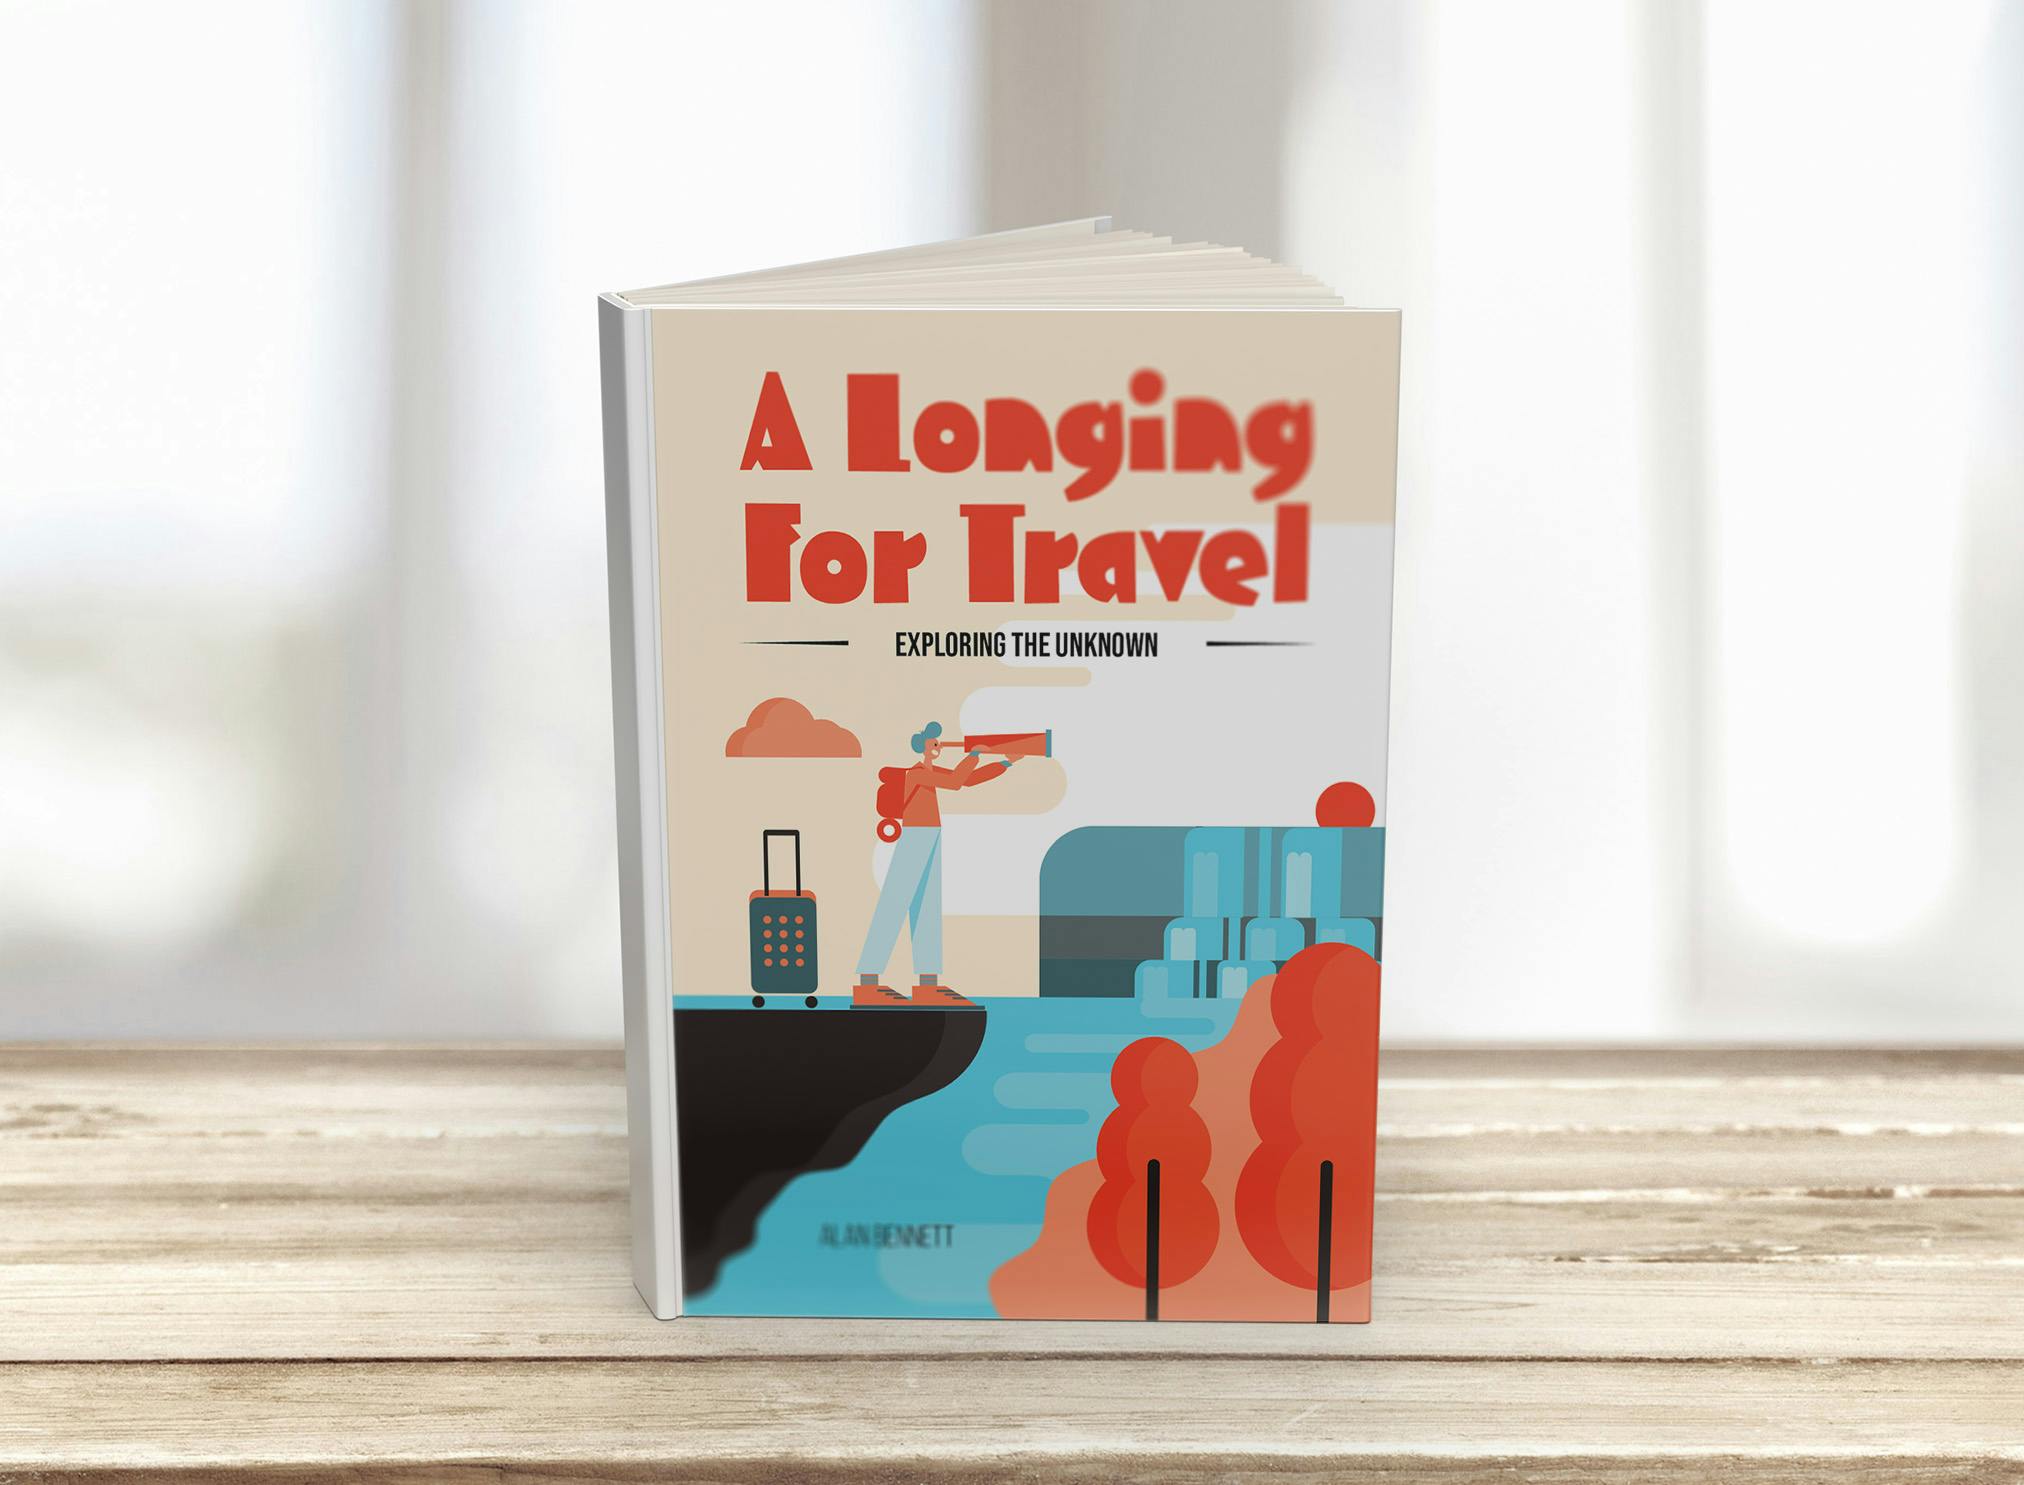 A Longing for Travel